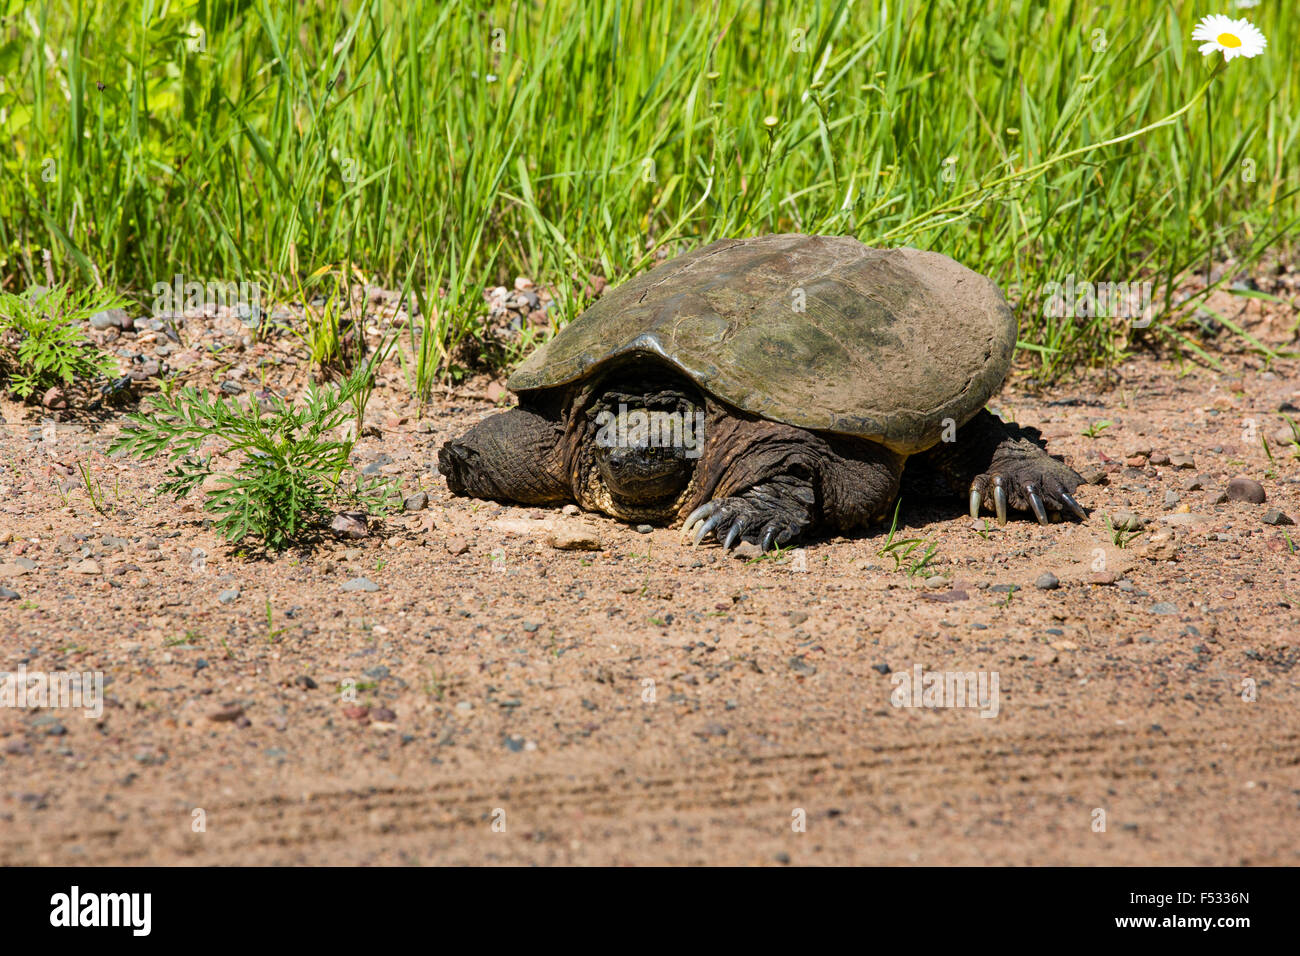 Common snapping turtle Stock Photo